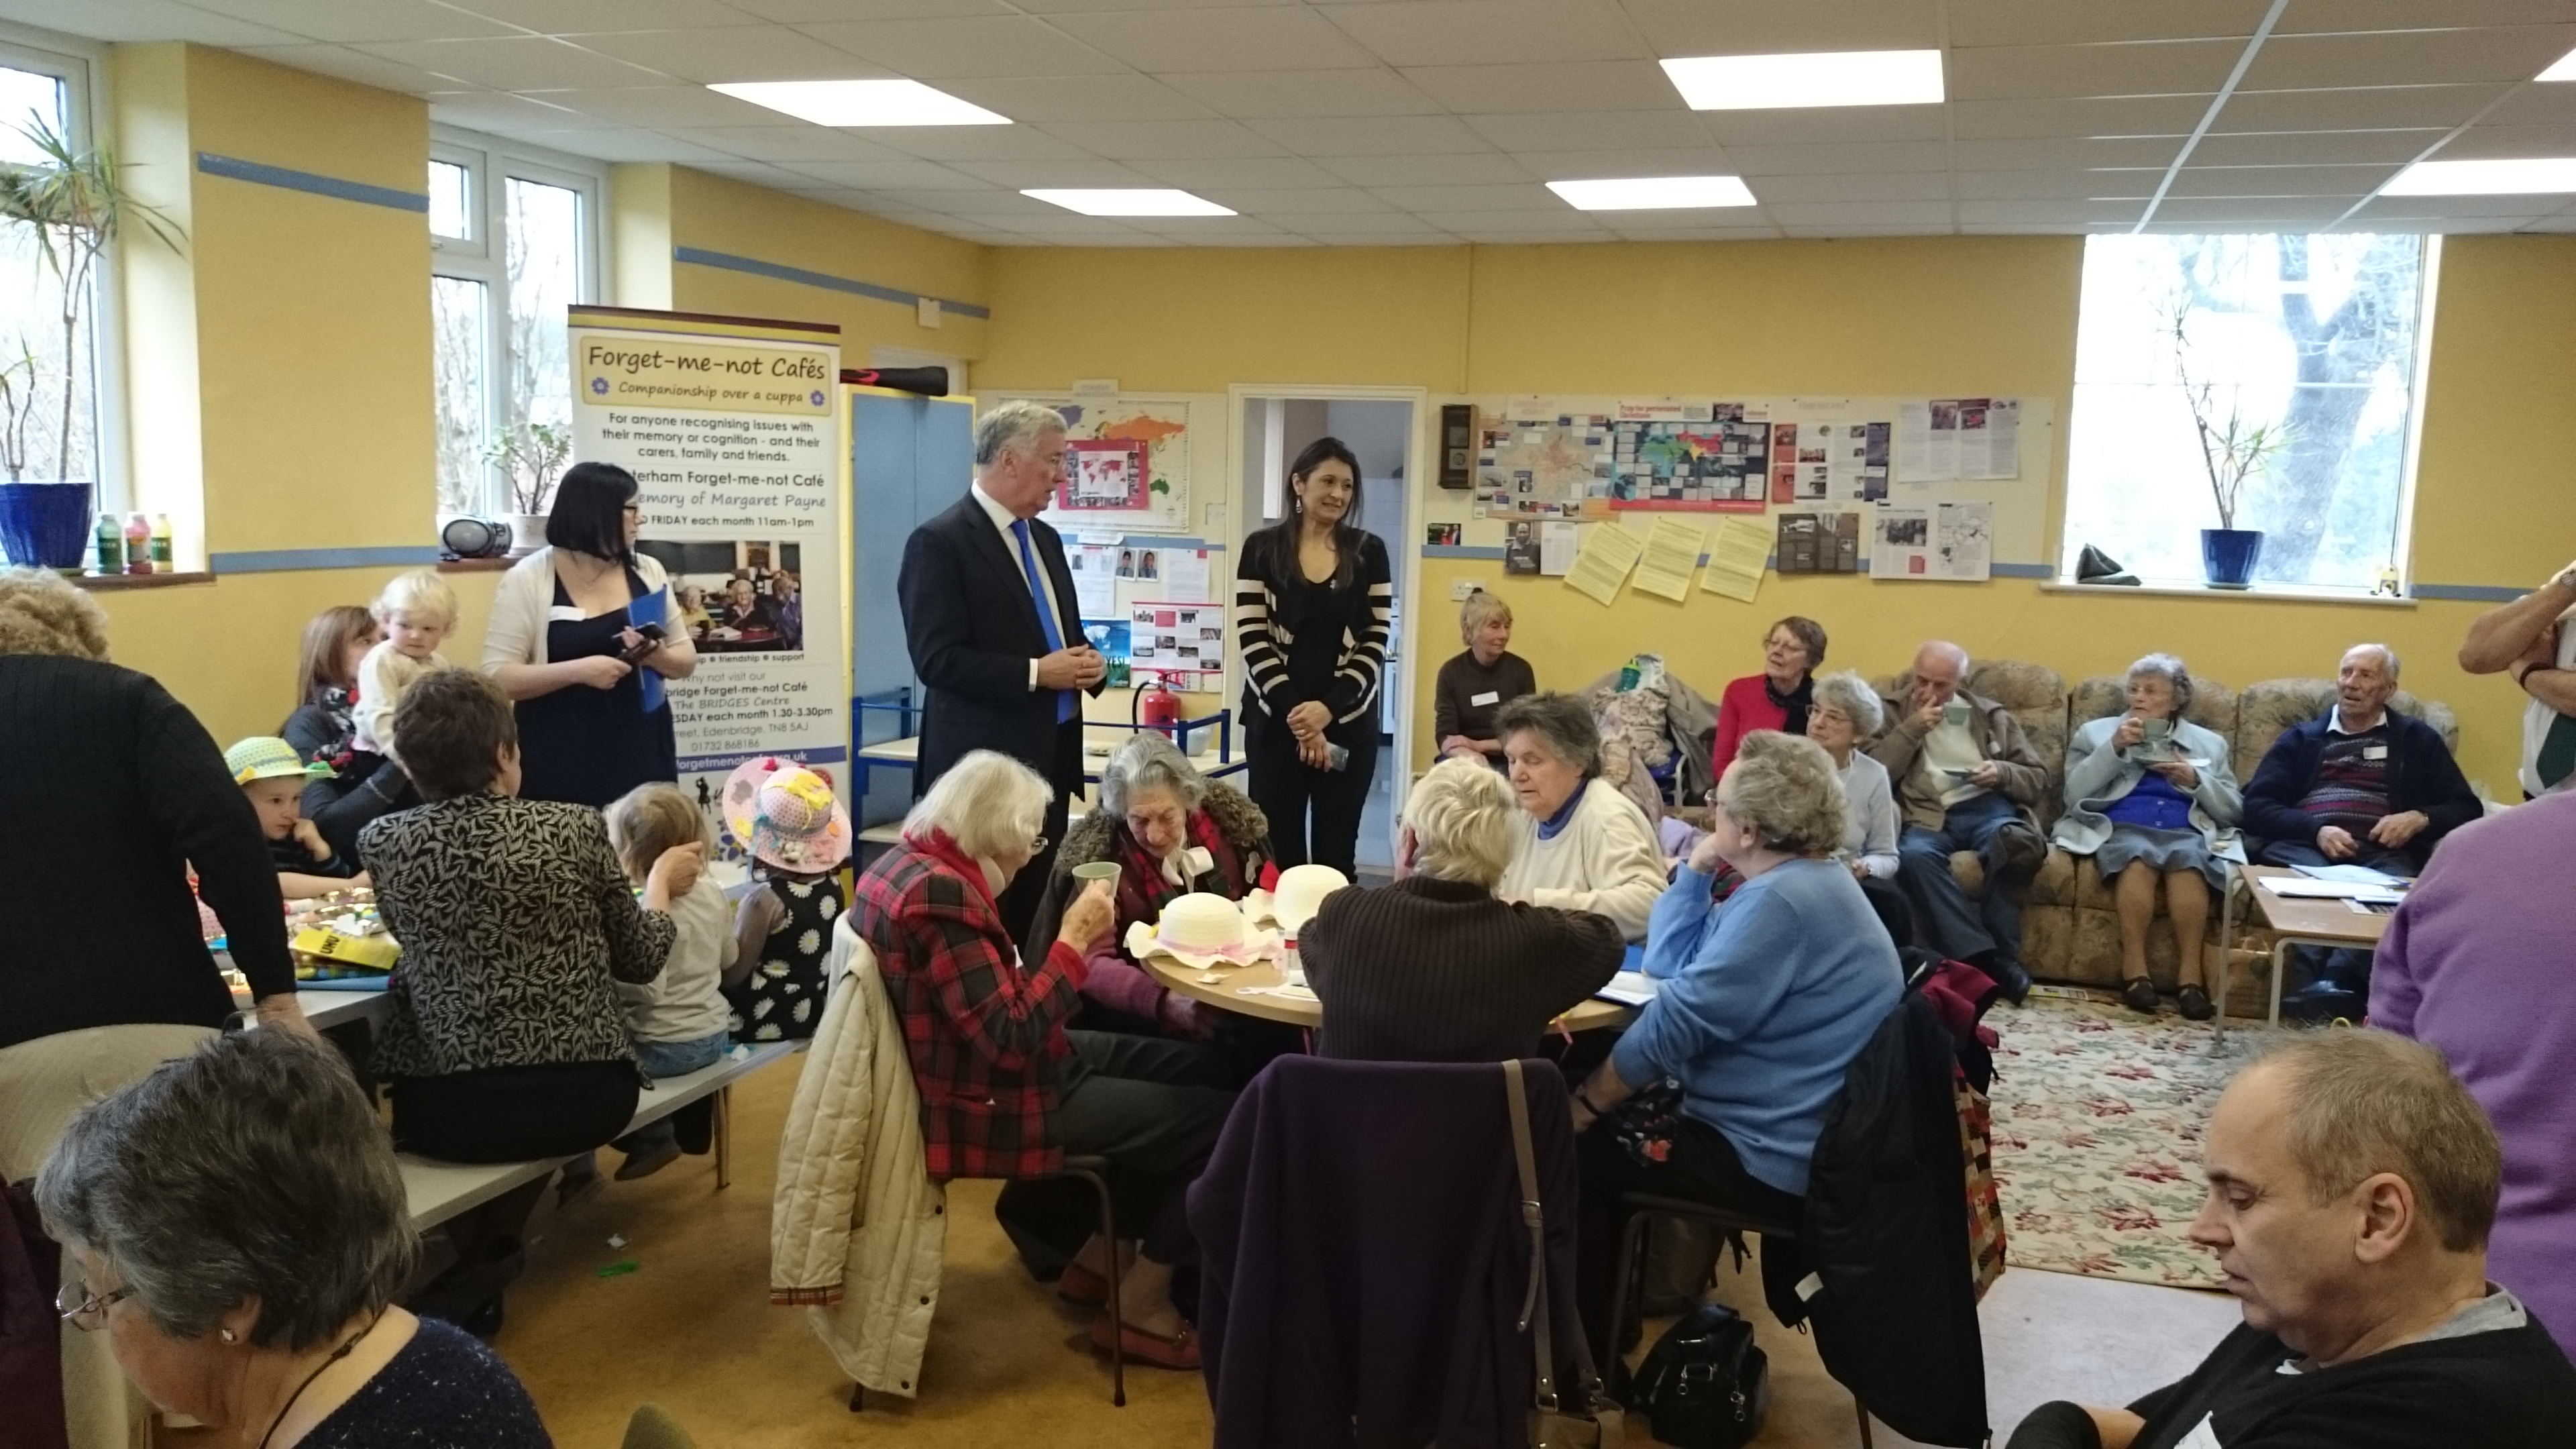 Speaking to dementia sufferers and carers at the Forget-me-not Cafe in Westerham.